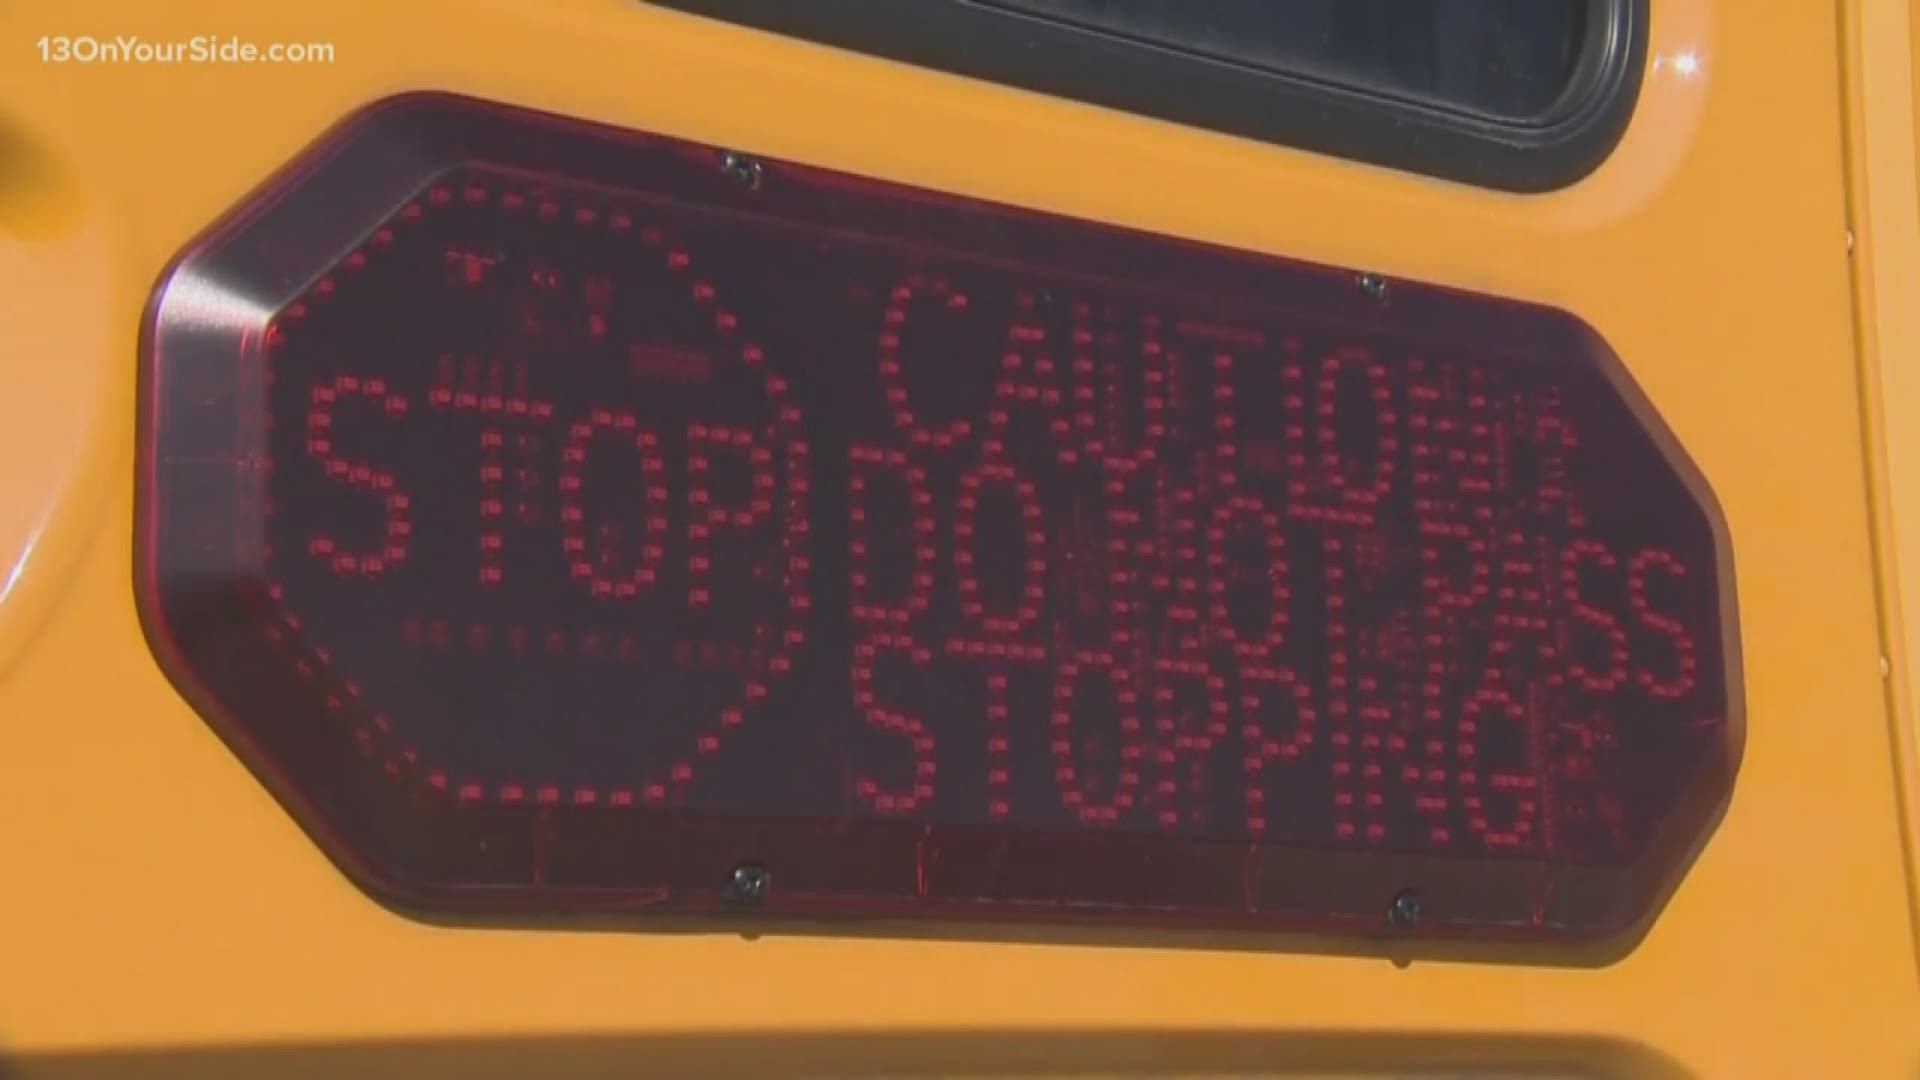 Michigan bill proposal would increase fines for passing school buses